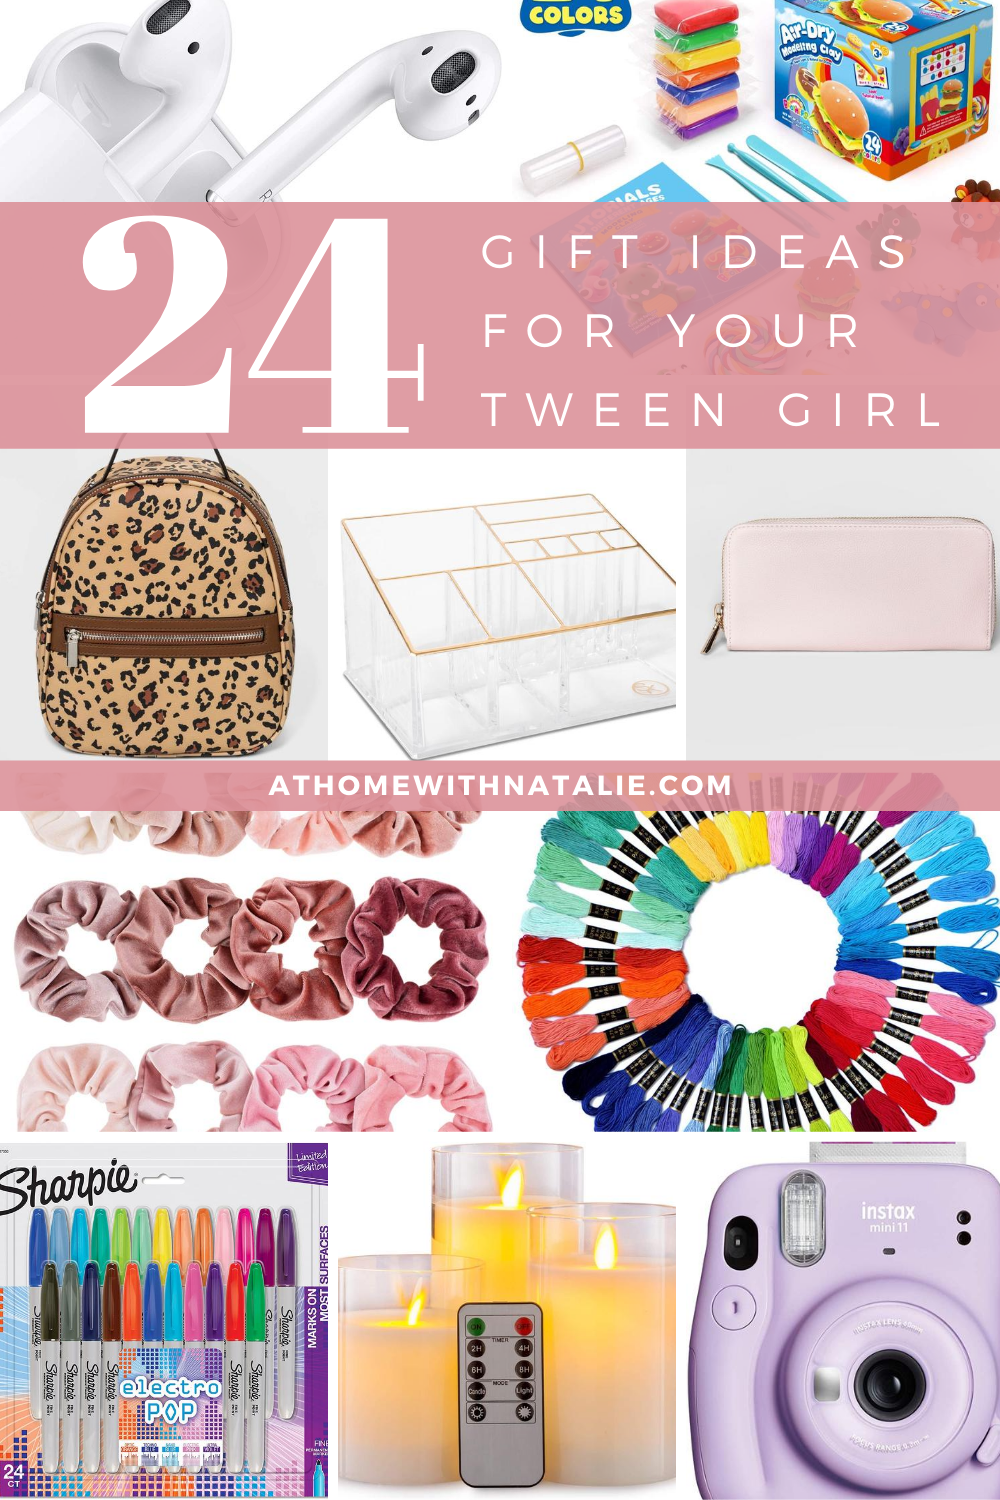 Gift Ideas For Your Tween Girls! – At Home With Natalie